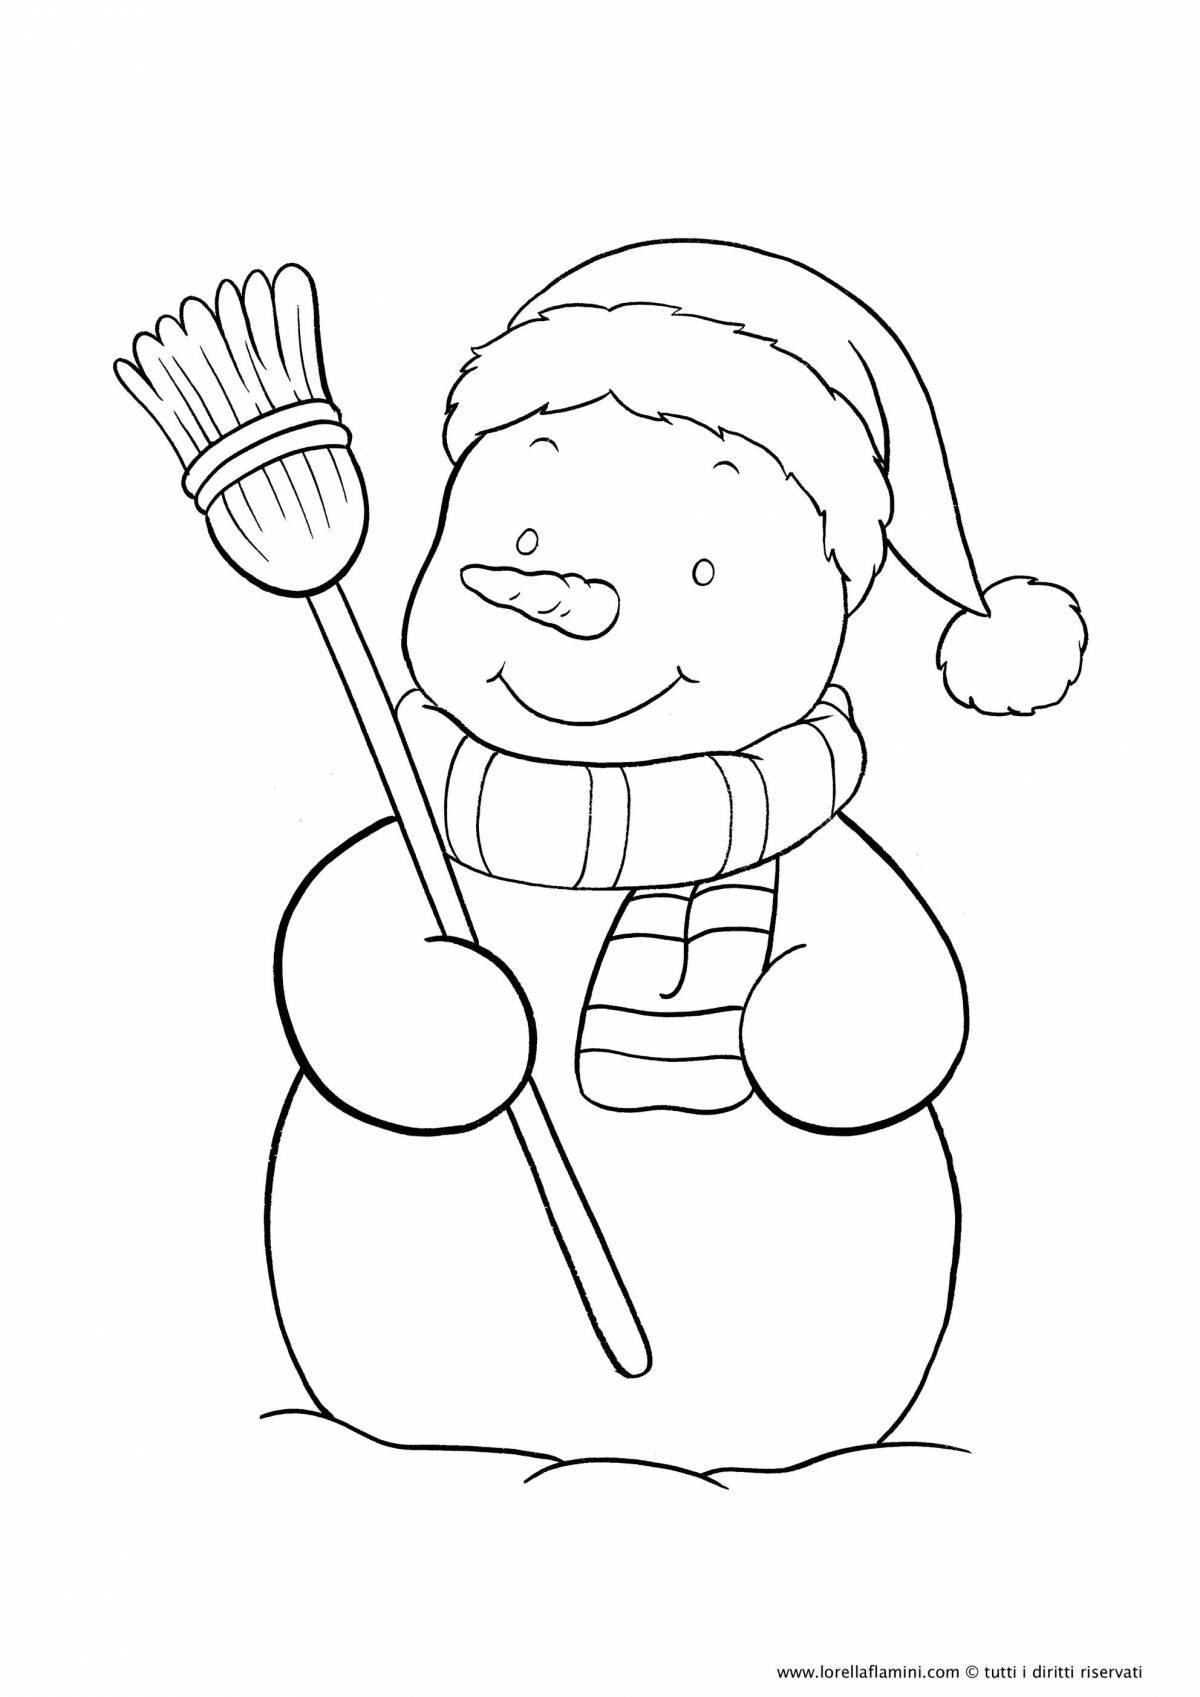 Adorable snowman coloring book for kids 3 4